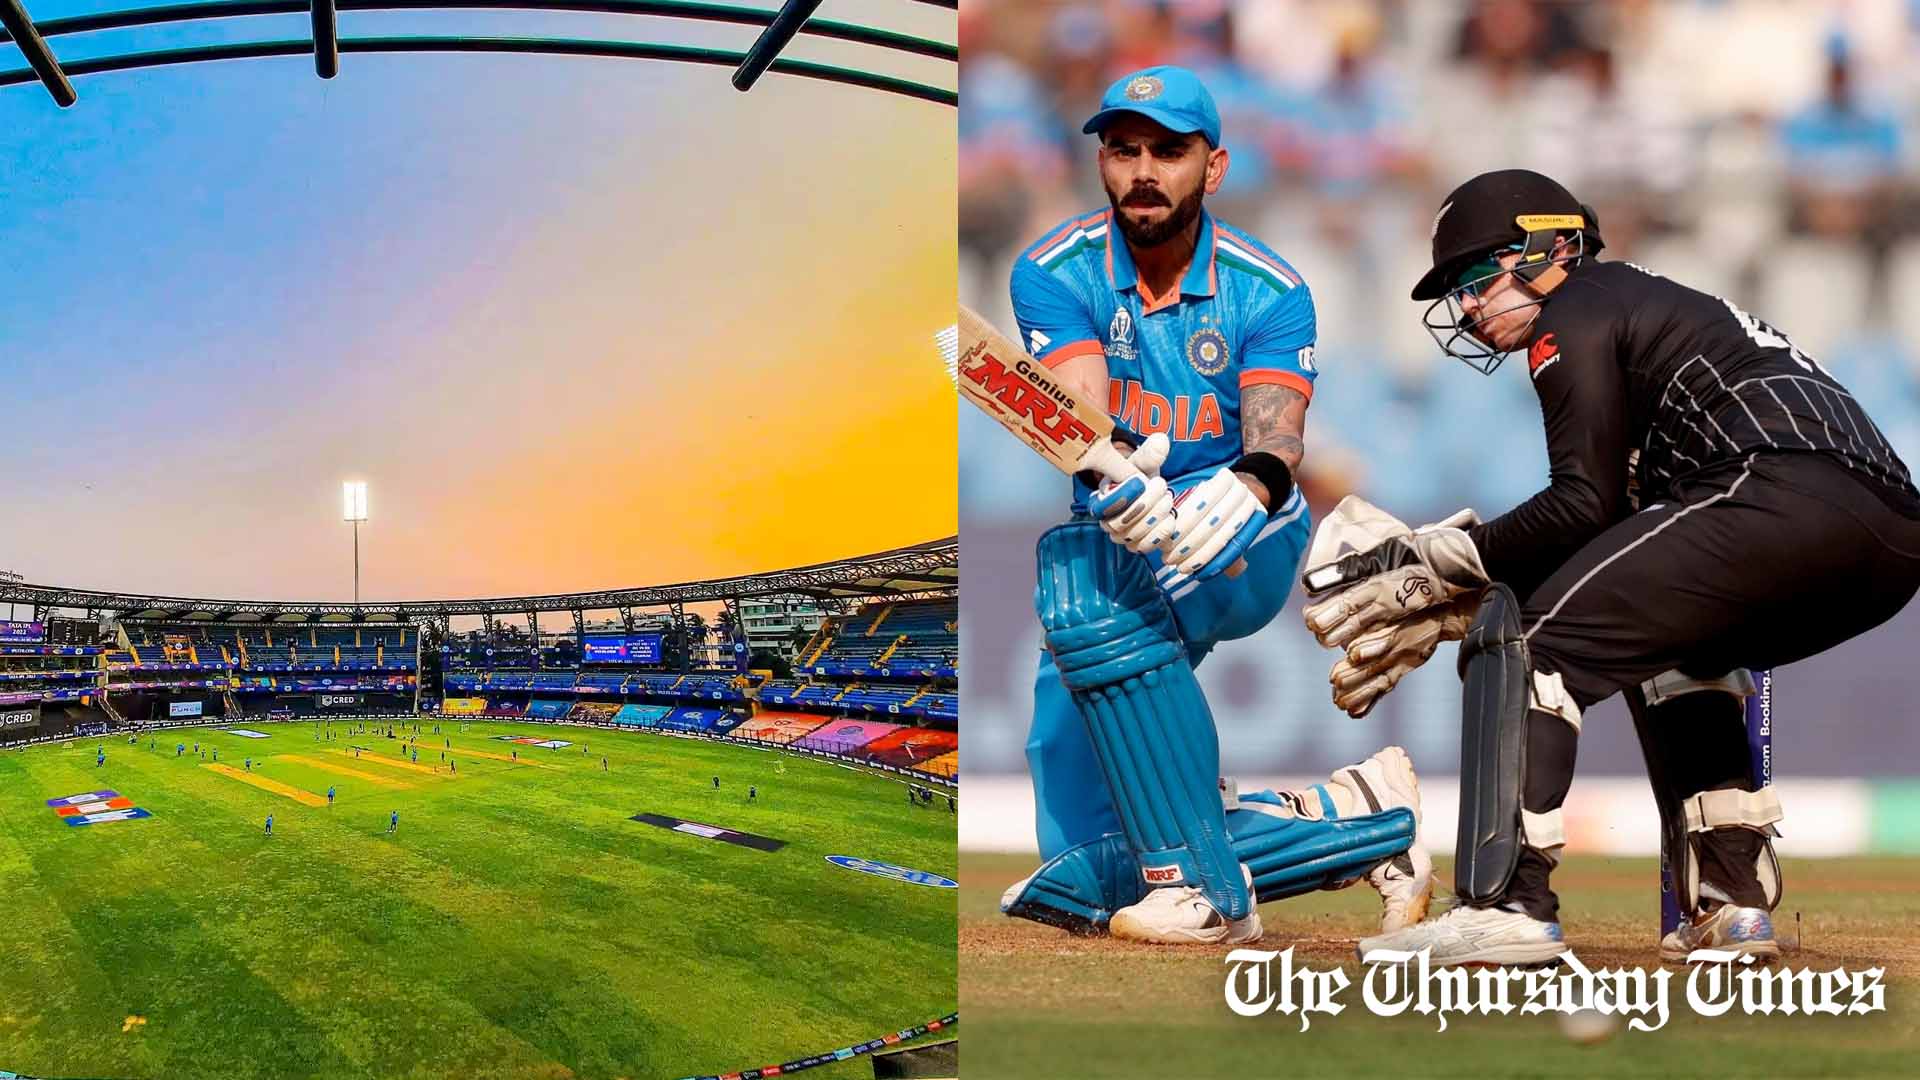 A combined file photo is shown of Wankhede Stadium at Mumbai (L) and India's Virat Kohli batting during the ICC Men's Cricket World Cup 2023 semi-final match between India and New Zealand on November 15, 2023 at Wankhede Stadium (R). — FILE/THE THURSDAY TIMES/ROBERT CIANFLONE